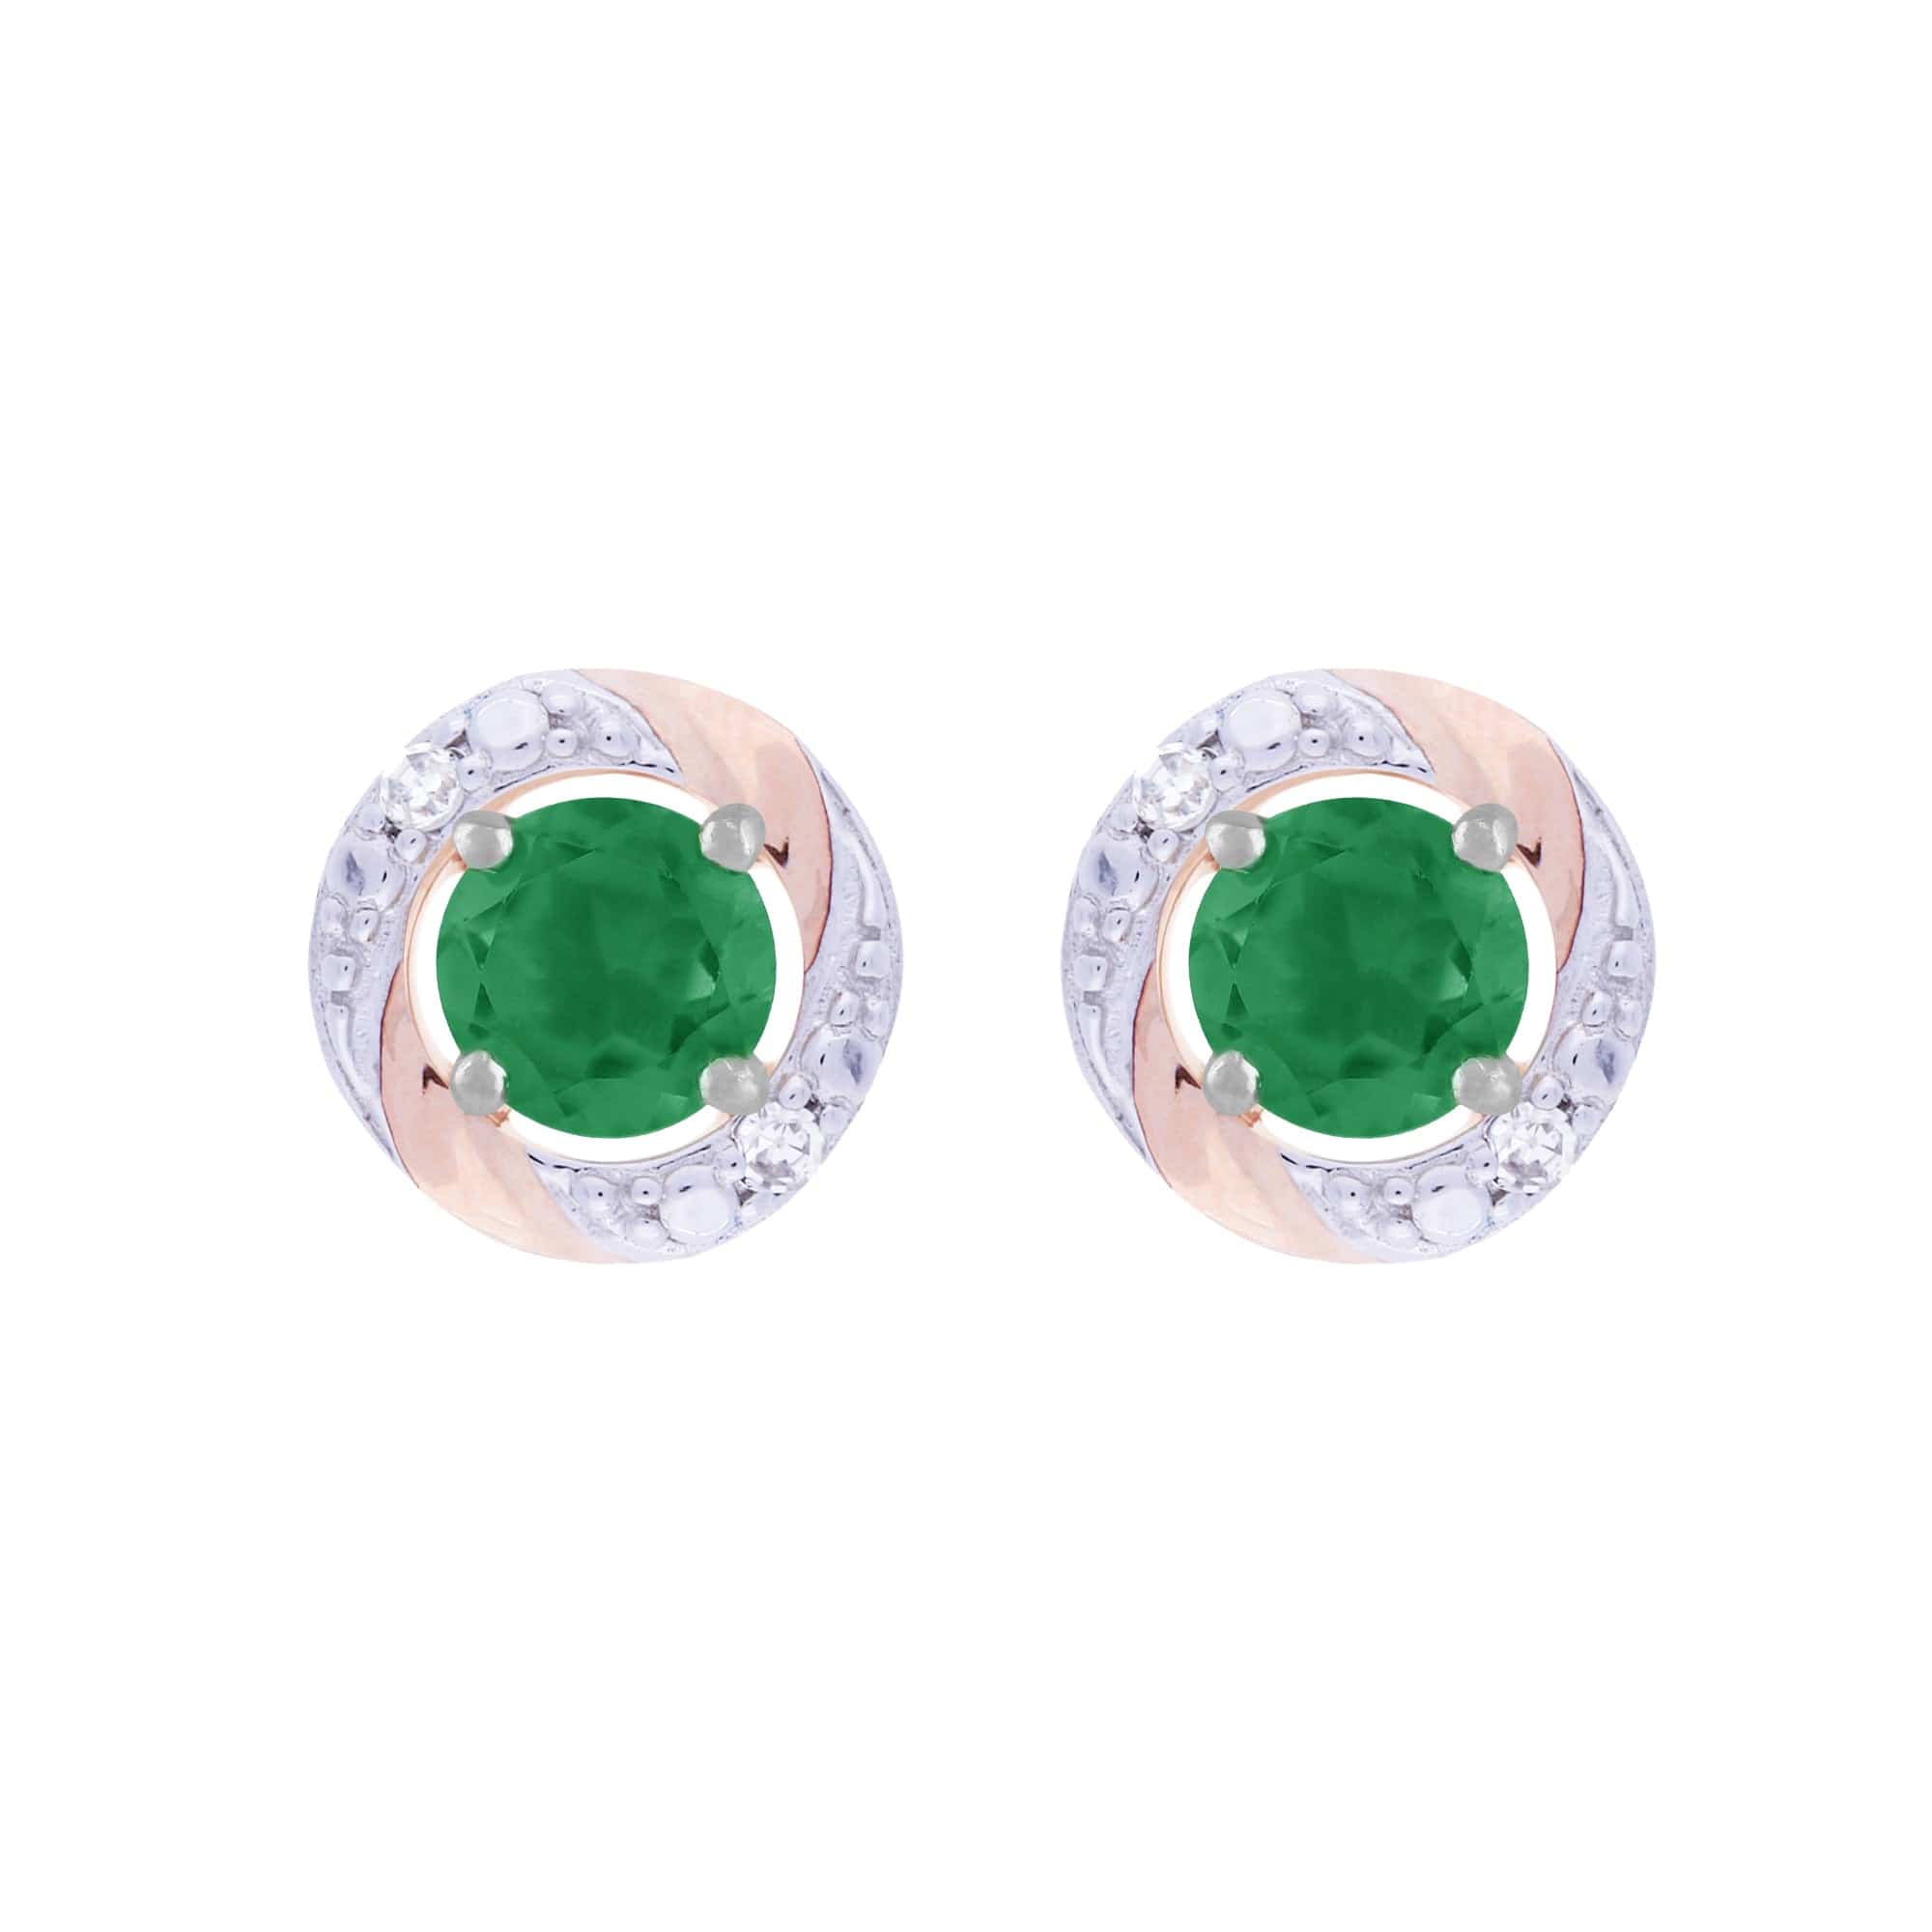 11621-191E0378019 Classic Round Emerald Stud Earrings with Detachable Diamond Round Earrings Jacket Set in 9ct White Gold 1